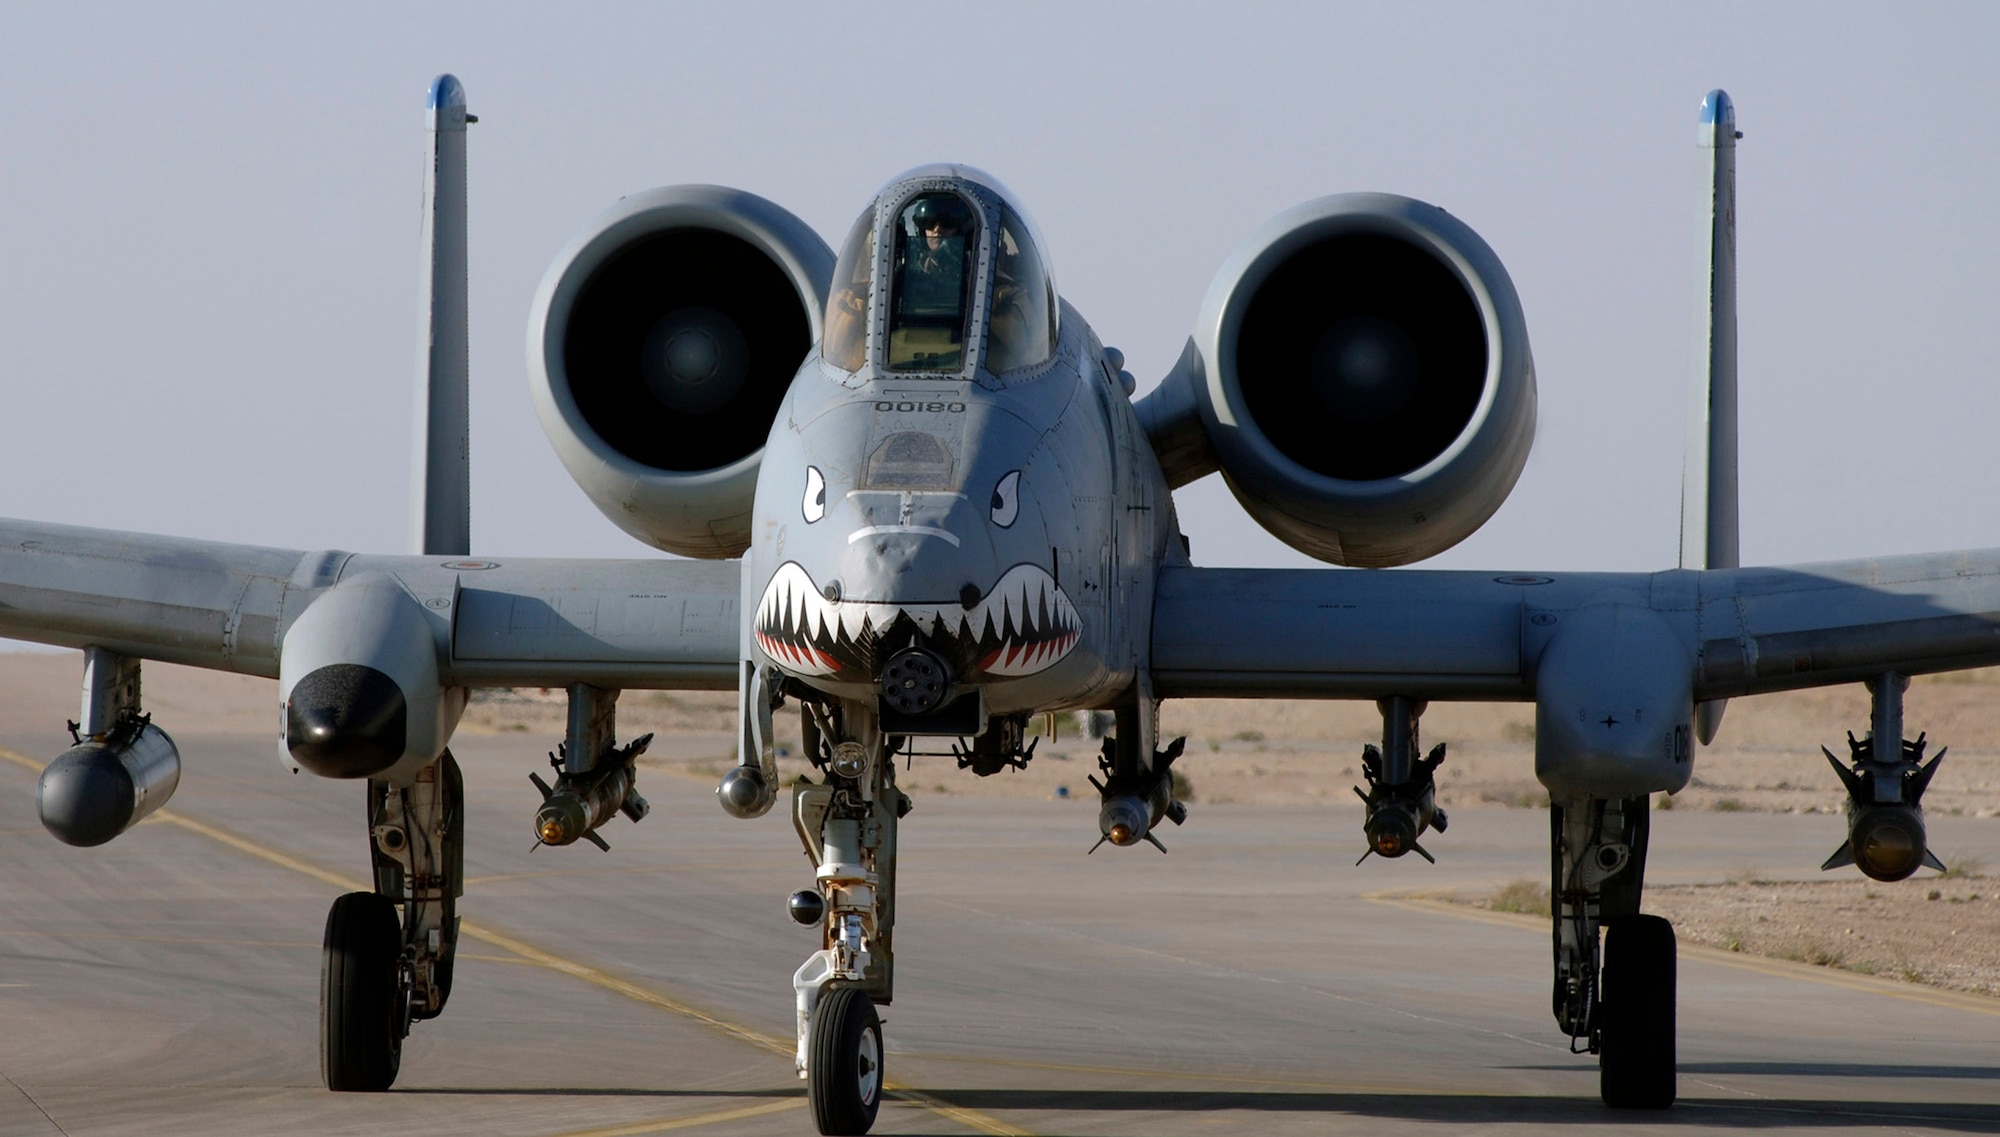 An A-10 Thunderbolt II takes off to provide close-air support to ground troops in Iraq April 25 from Al Asad Air Base, Iraq. The 438th Air Expeditionary Group A-10s perform 10 sorties daily, with 900 sorties in this last four months. (U.S. Air Force photo/Tech. Sgt. Cecilio M. Ricardo Jr.)
